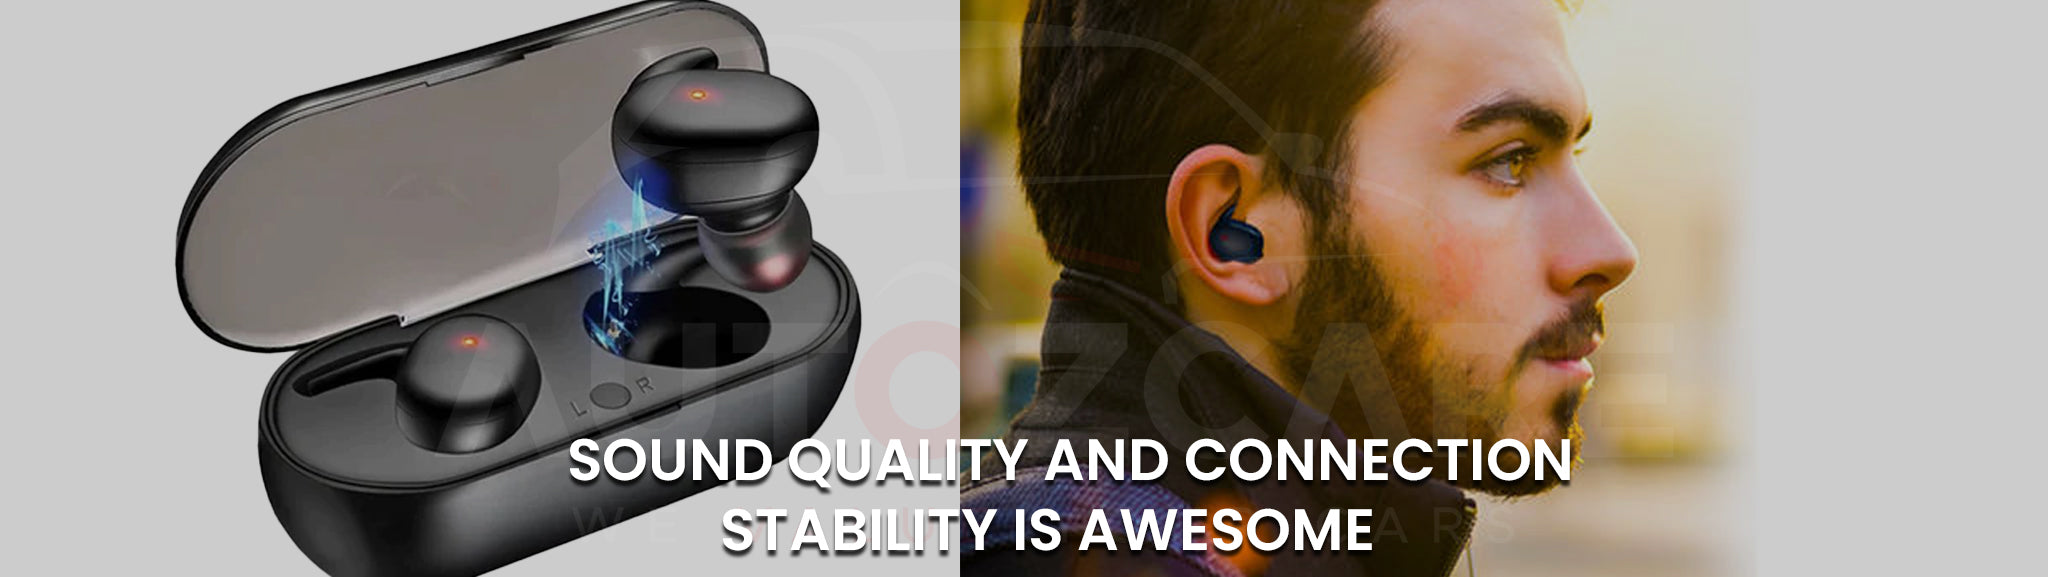 2) Sound quality and connection stability is awesome